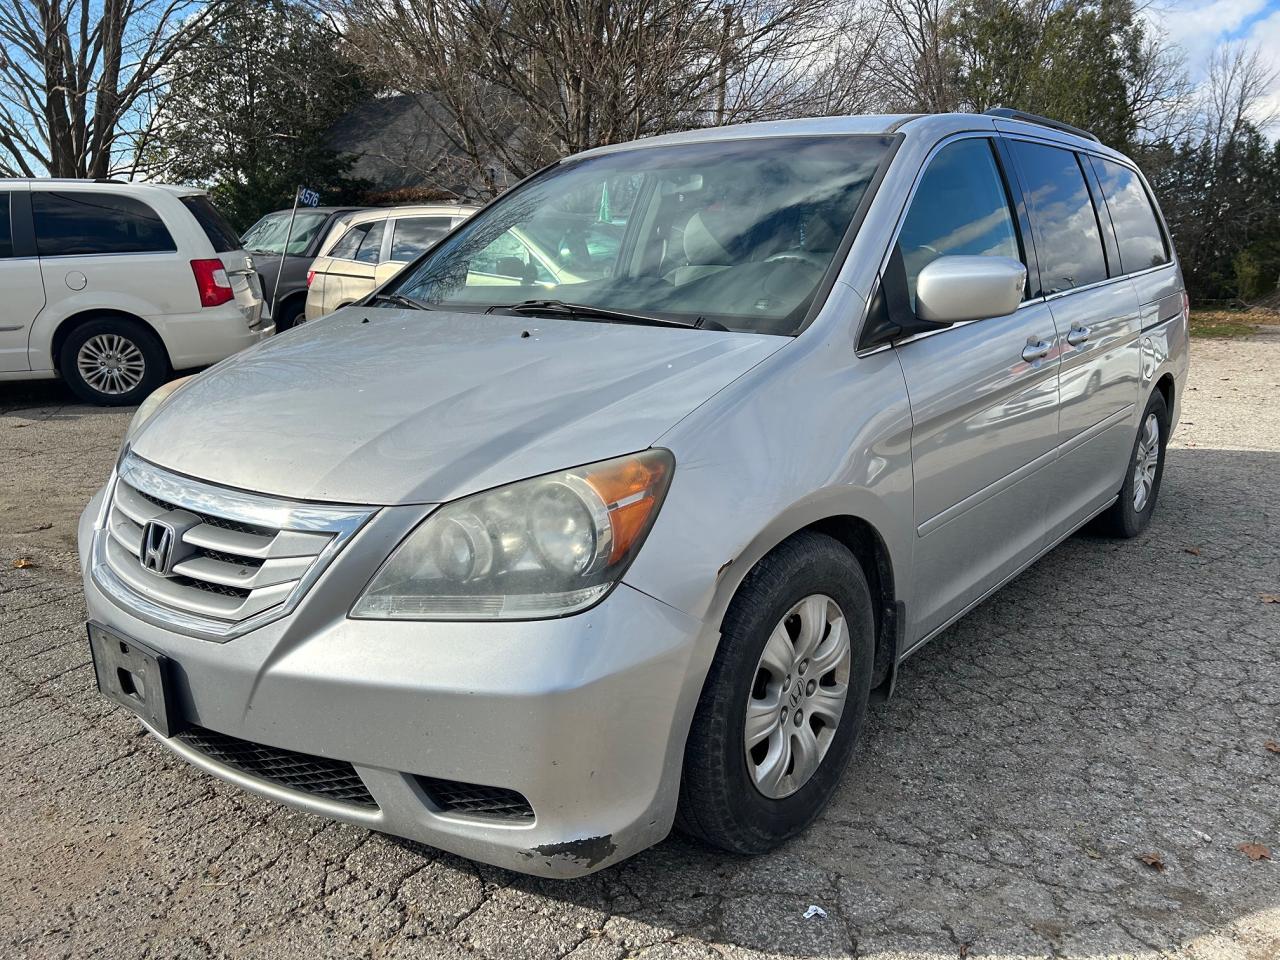 2010 Honda Odyssey SE*EXE COND*7 PASS*ONE OWNER*246 KMS*NO ACCIDENTS* - Photo #1